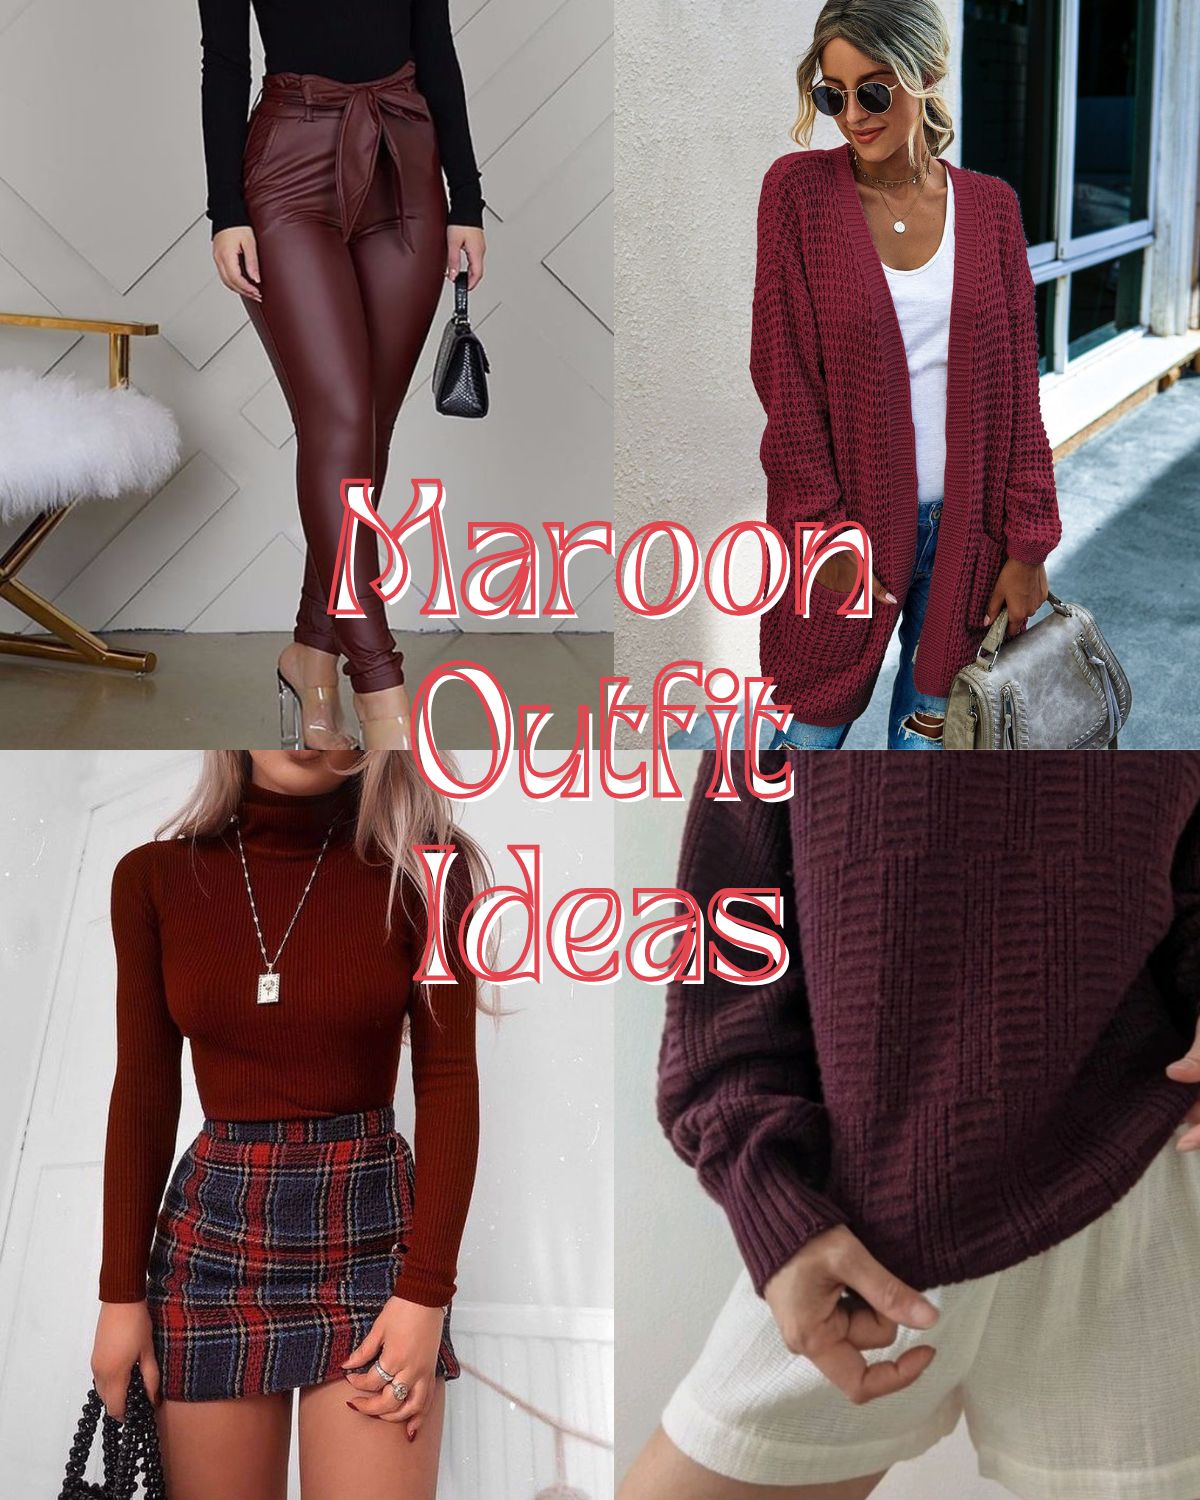 Outfit ideas containing maroon, four women in fall outfits